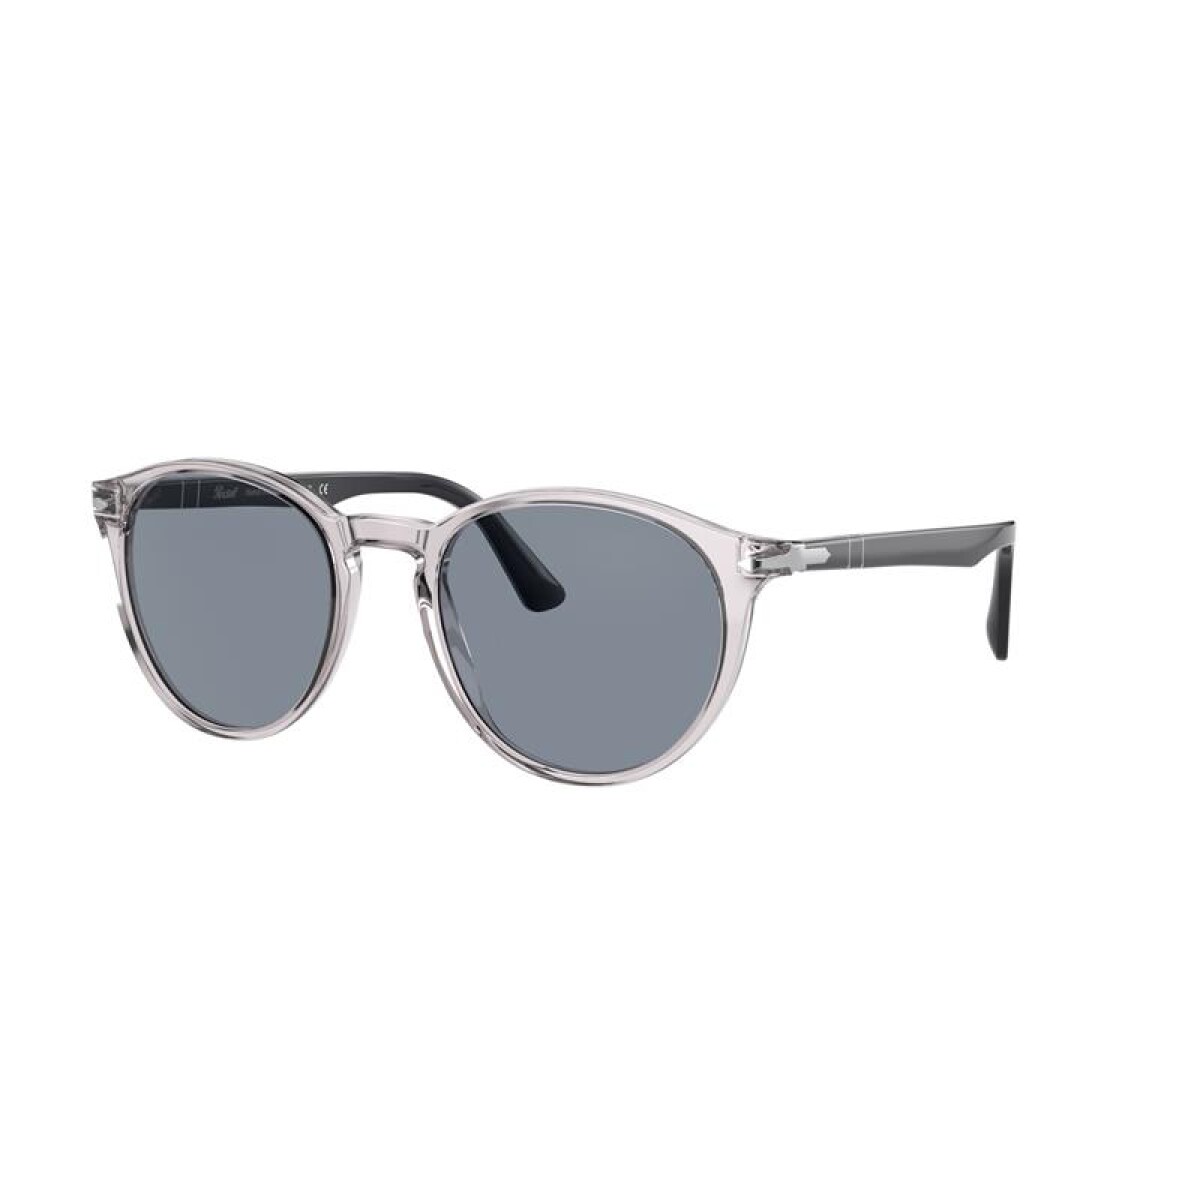 Persol 3152-s - 1133/56 